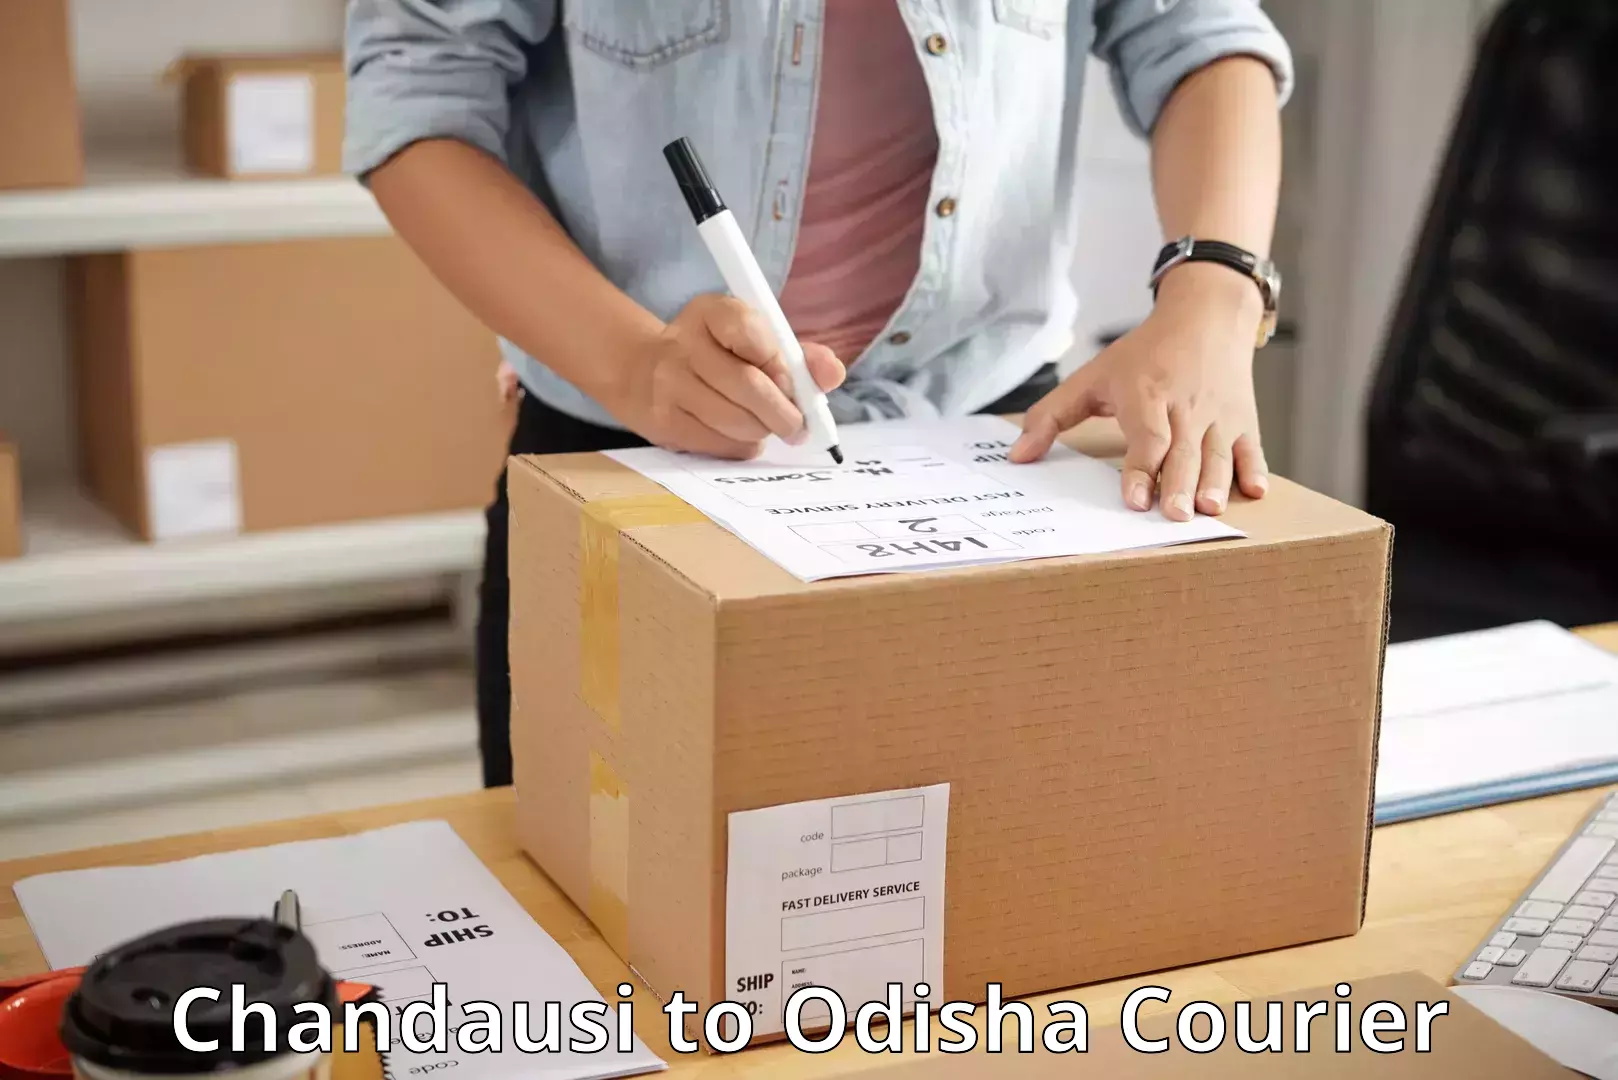 Round-the-clock parcel delivery Chandausi to Odisha